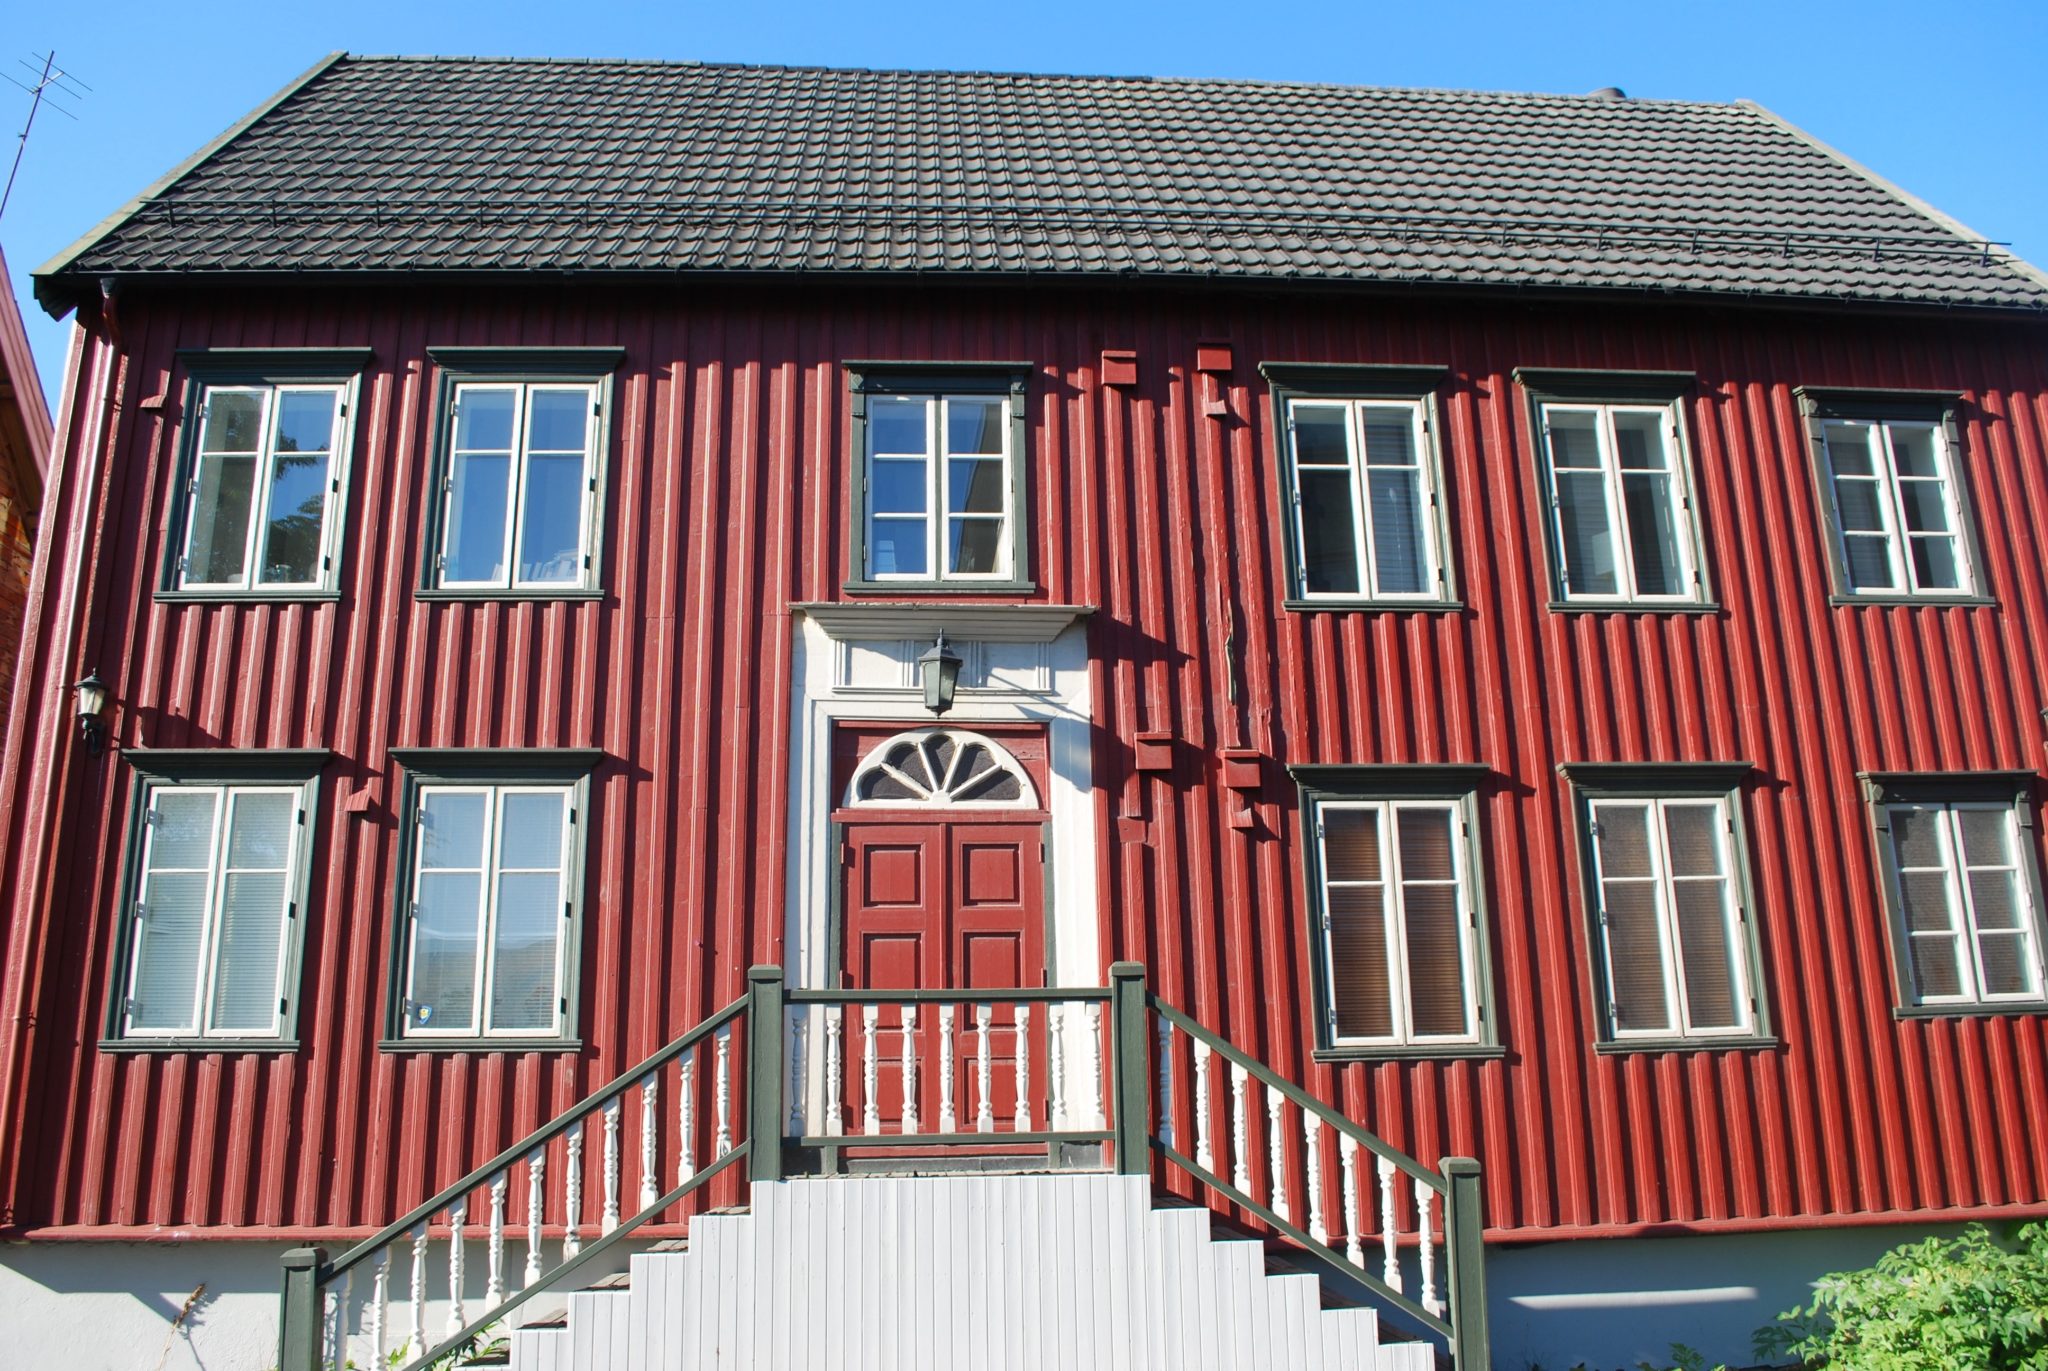 A red merchant's house with vertical panelling denoting Trondheim style architecture © Knut Hansvold